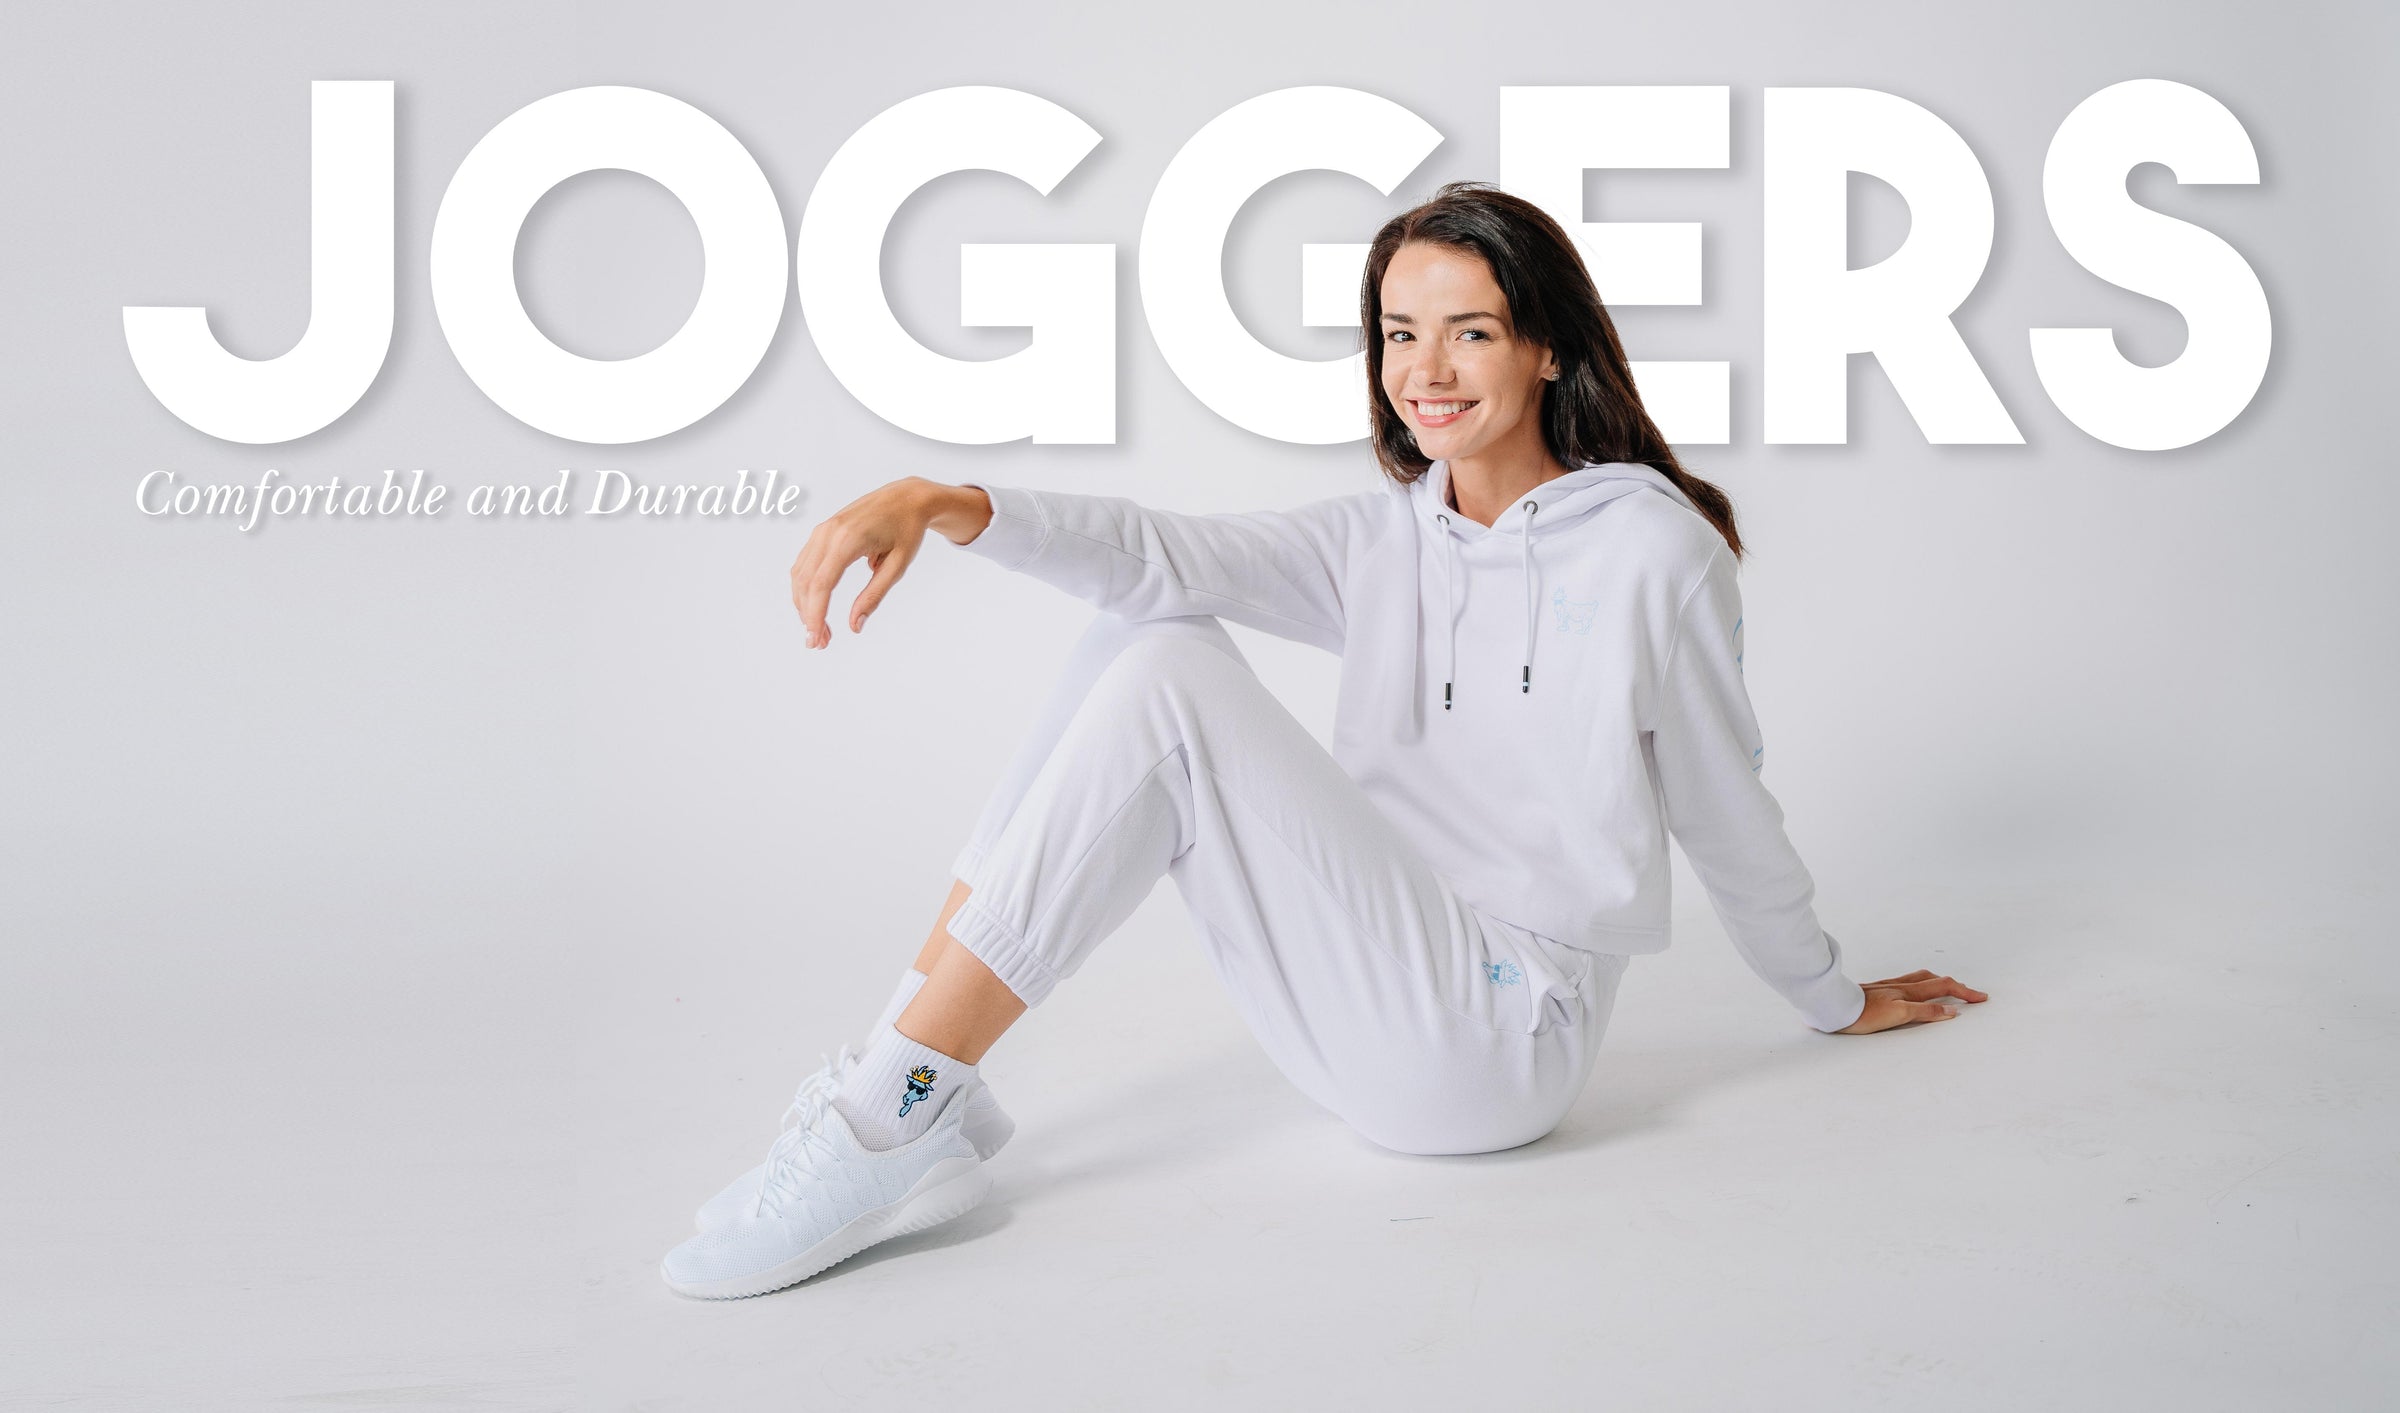 Image with model sitting on ground wearing white joggers linked to Joggers collection